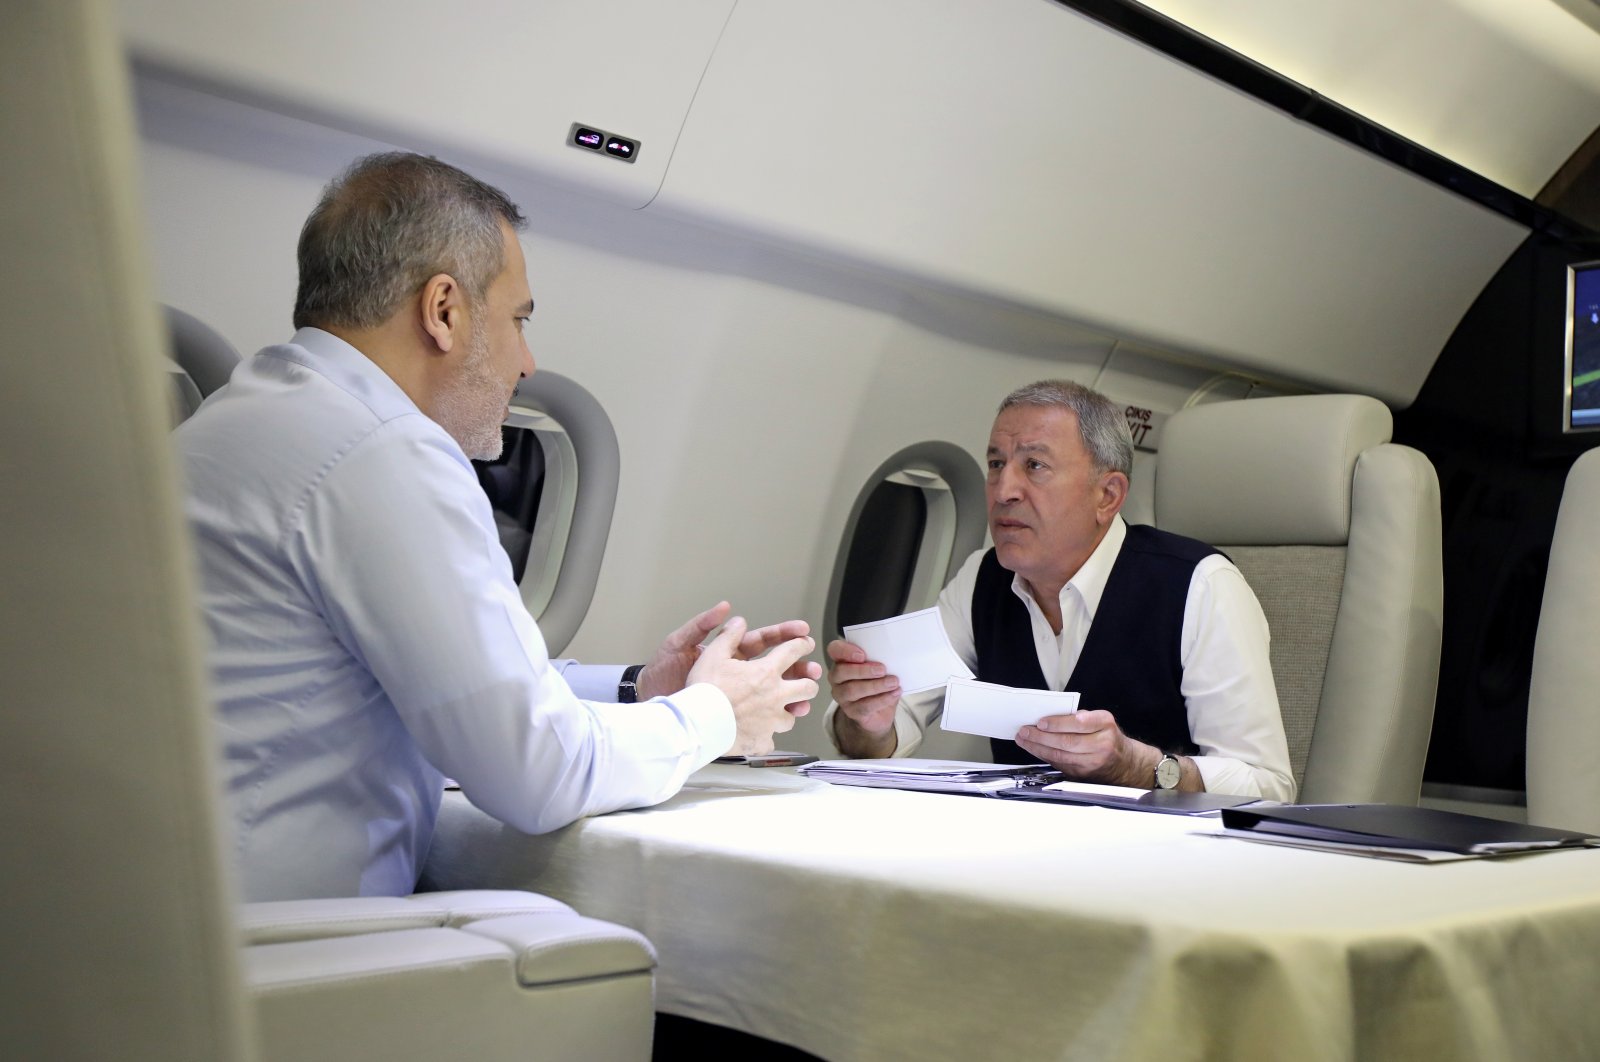 Defense Minister Hulusi Akar (R) is seen with Intelligence chief Hakan Fidan (L) on the plane during his visit to Moscow, Russia, April 25, 2023 (AA Photo)